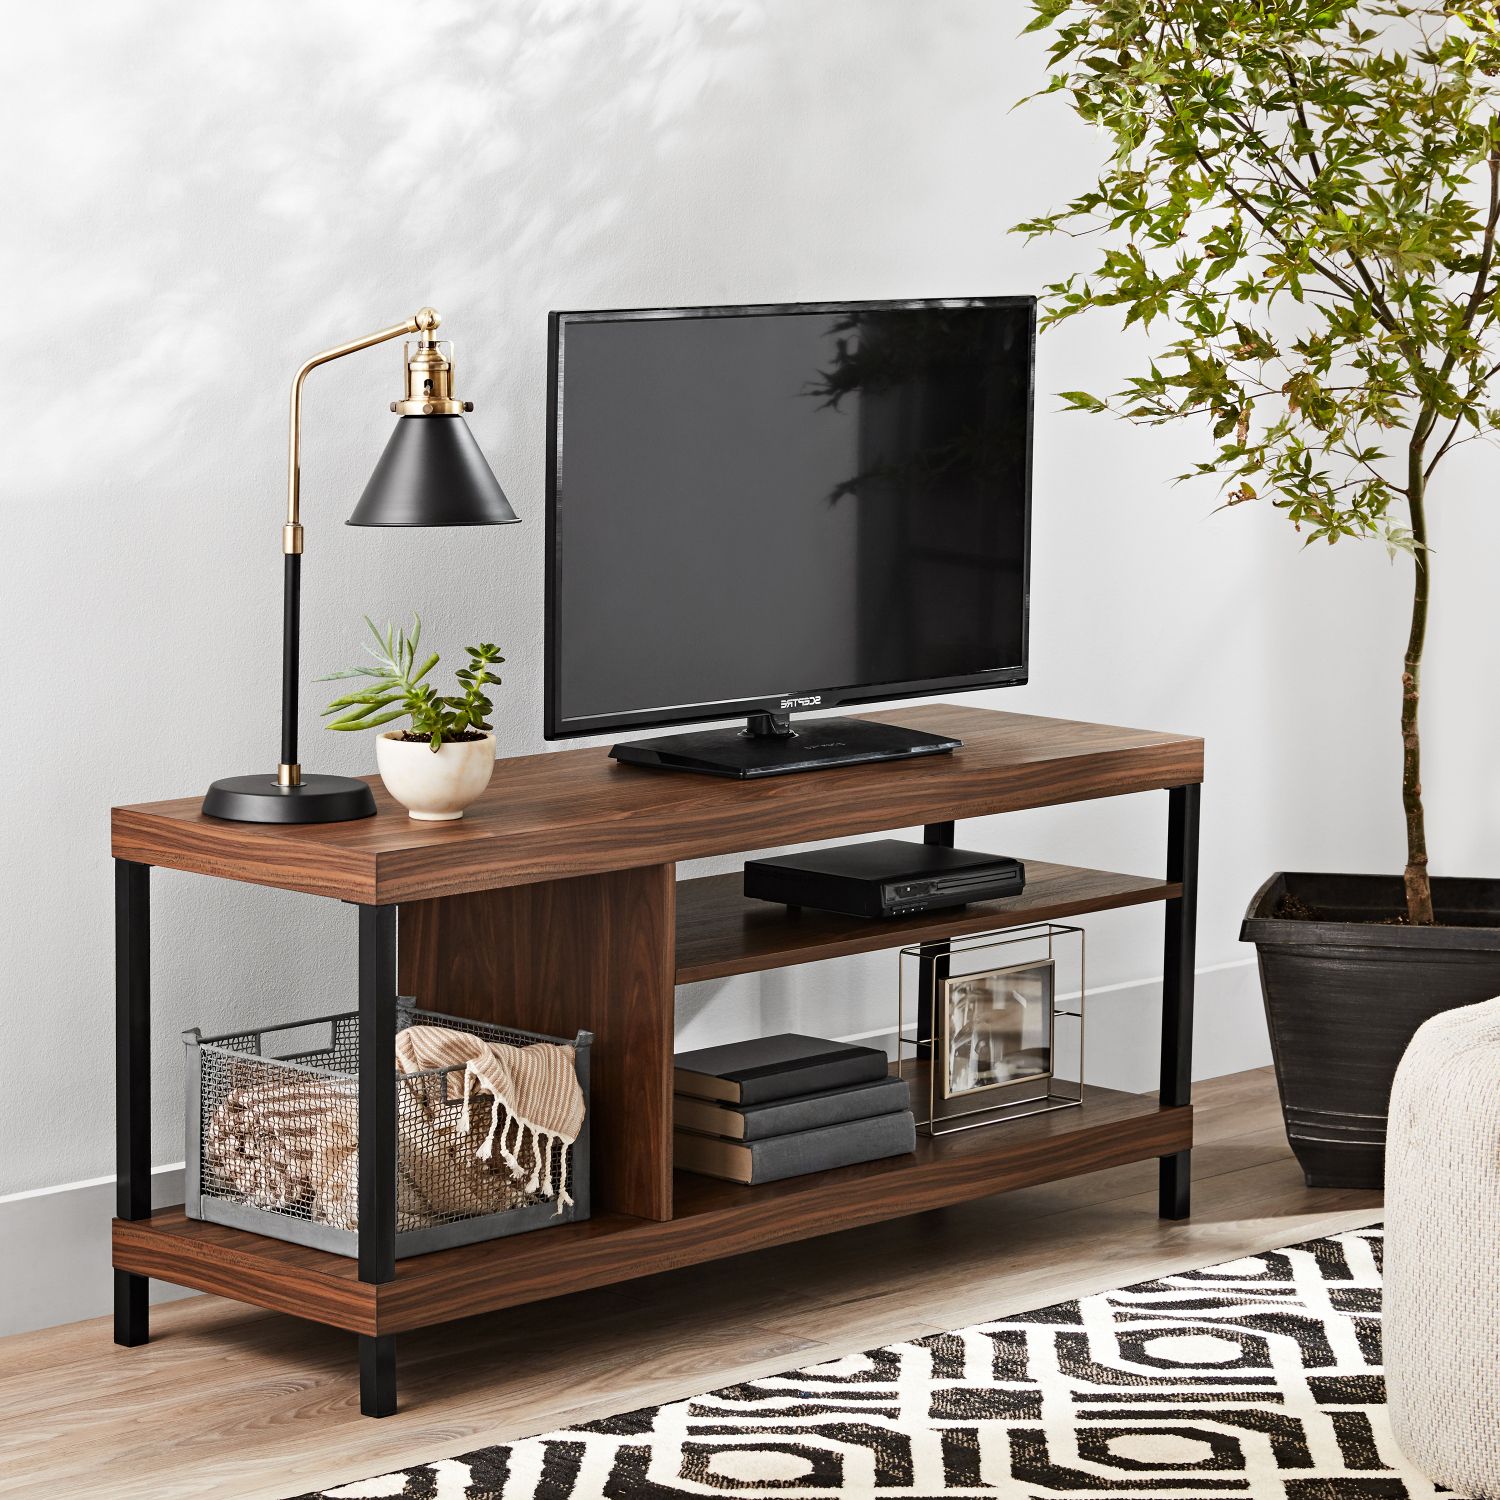 Mainstays Sumpter Park Collection Media Tv Stand For Tvs With Regard To Canyon Oak Tv Stands (Gallery 8 of 20)